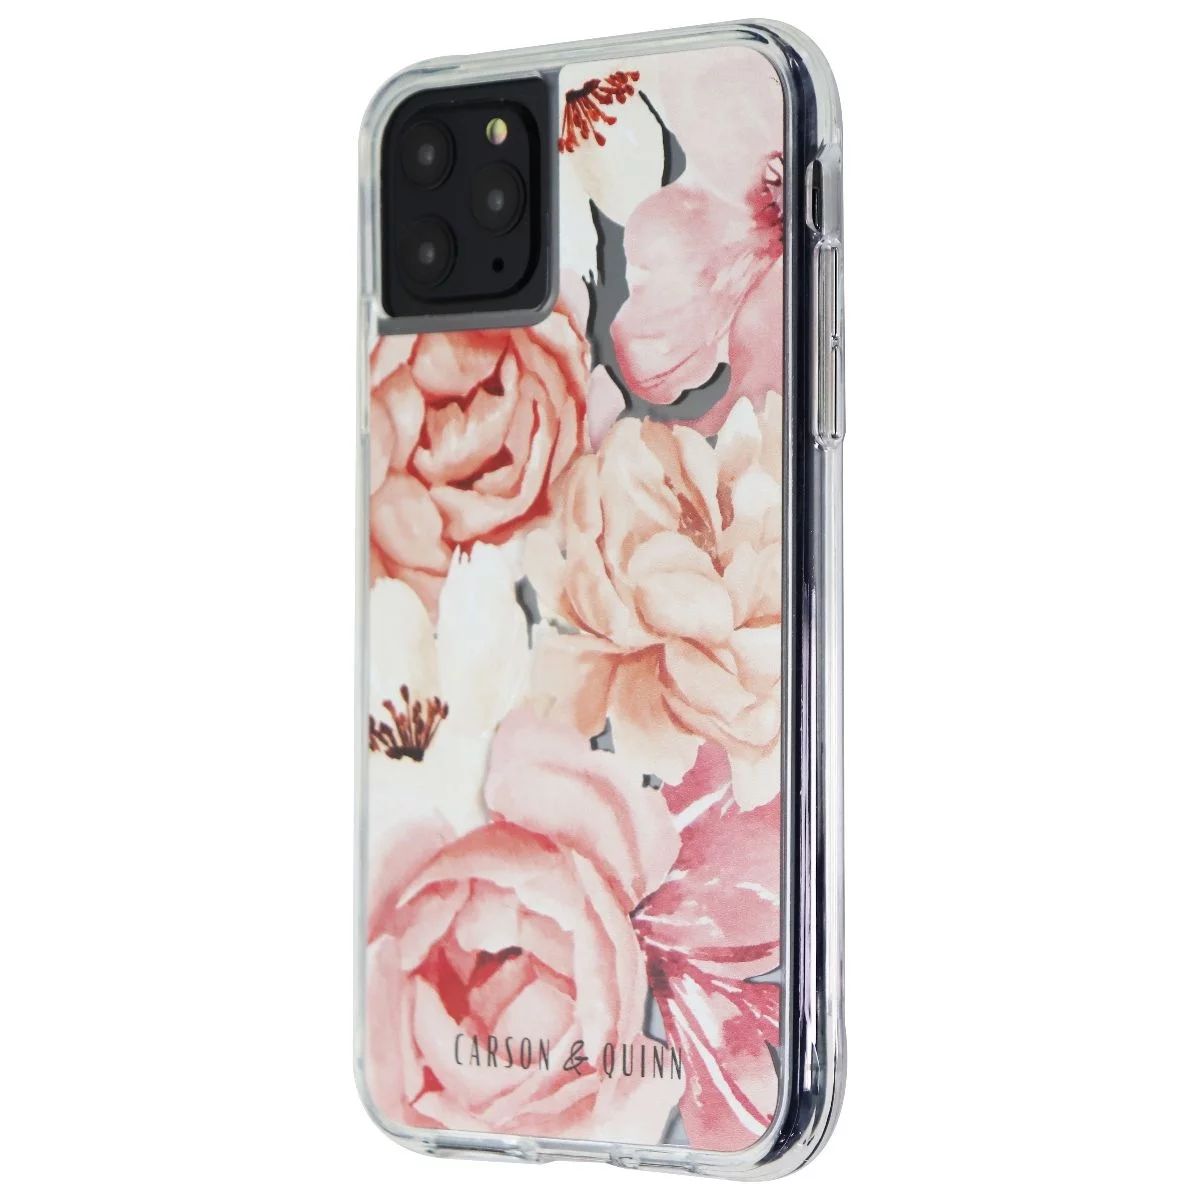 Carson & Quinn Hybrid Case for iPhone 11 Pro Max/Xs Max - Watercolor Flowers (Refurbished) | Walmart (US)